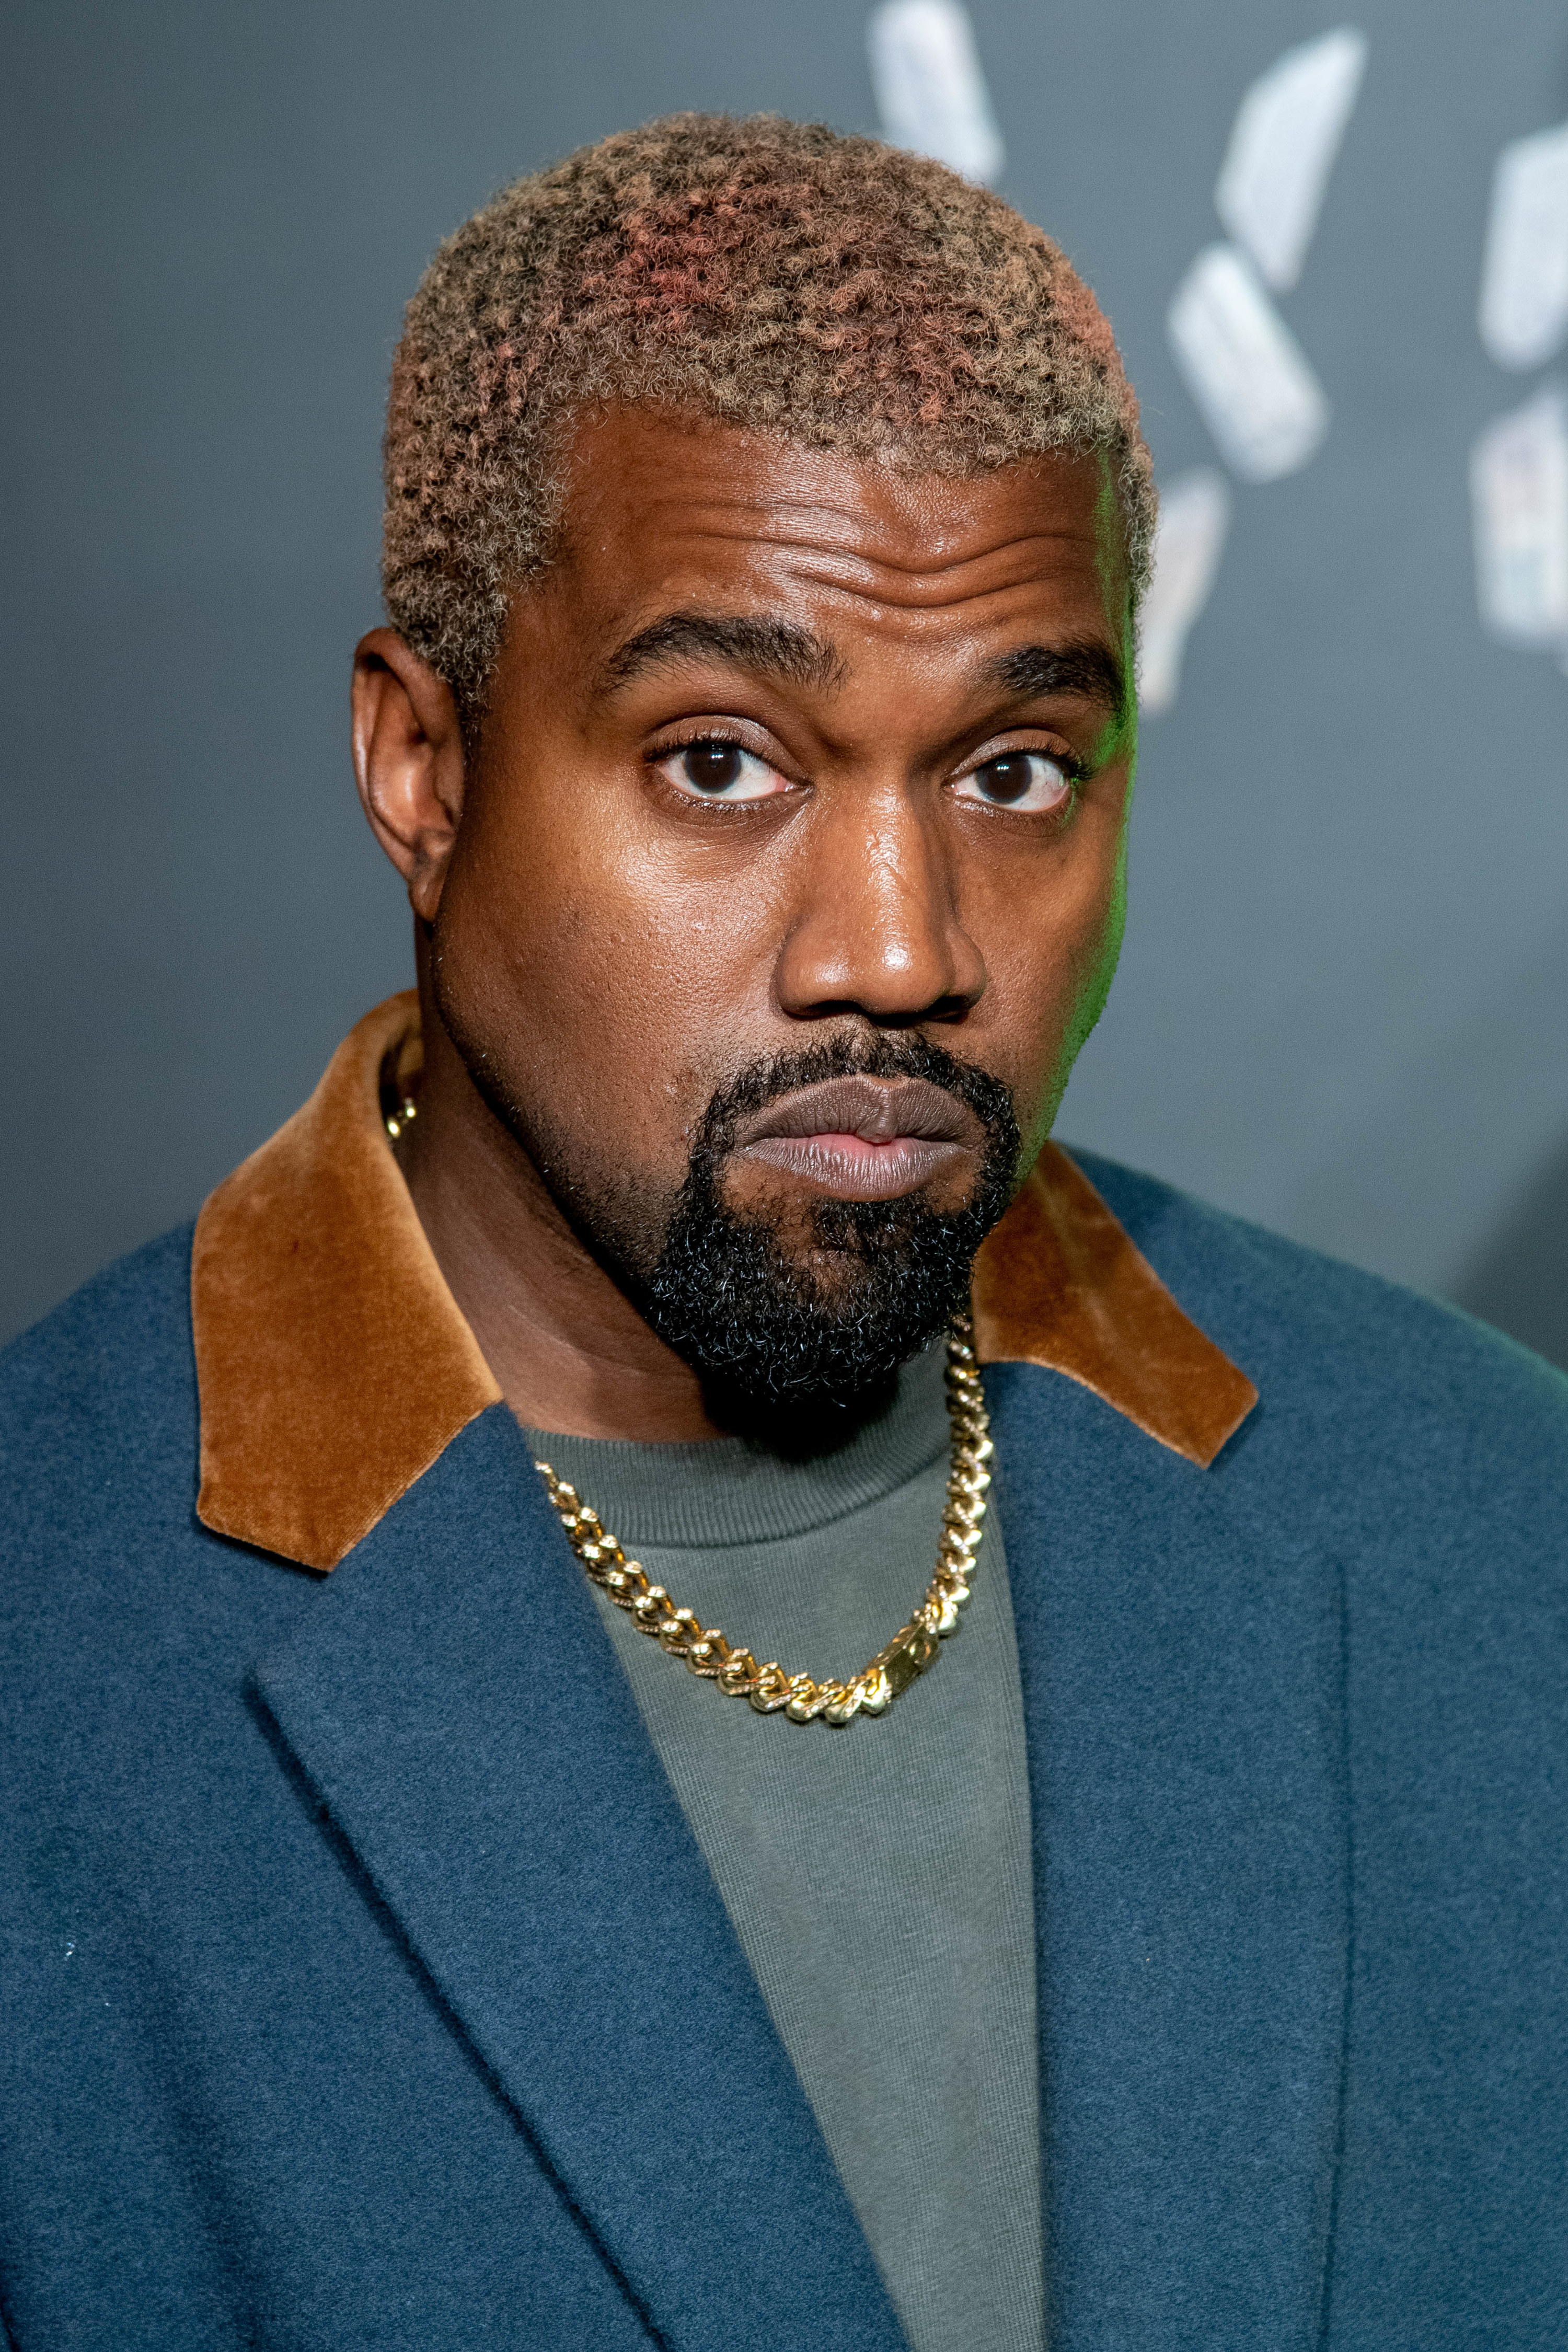 Kanye at a red carpet event